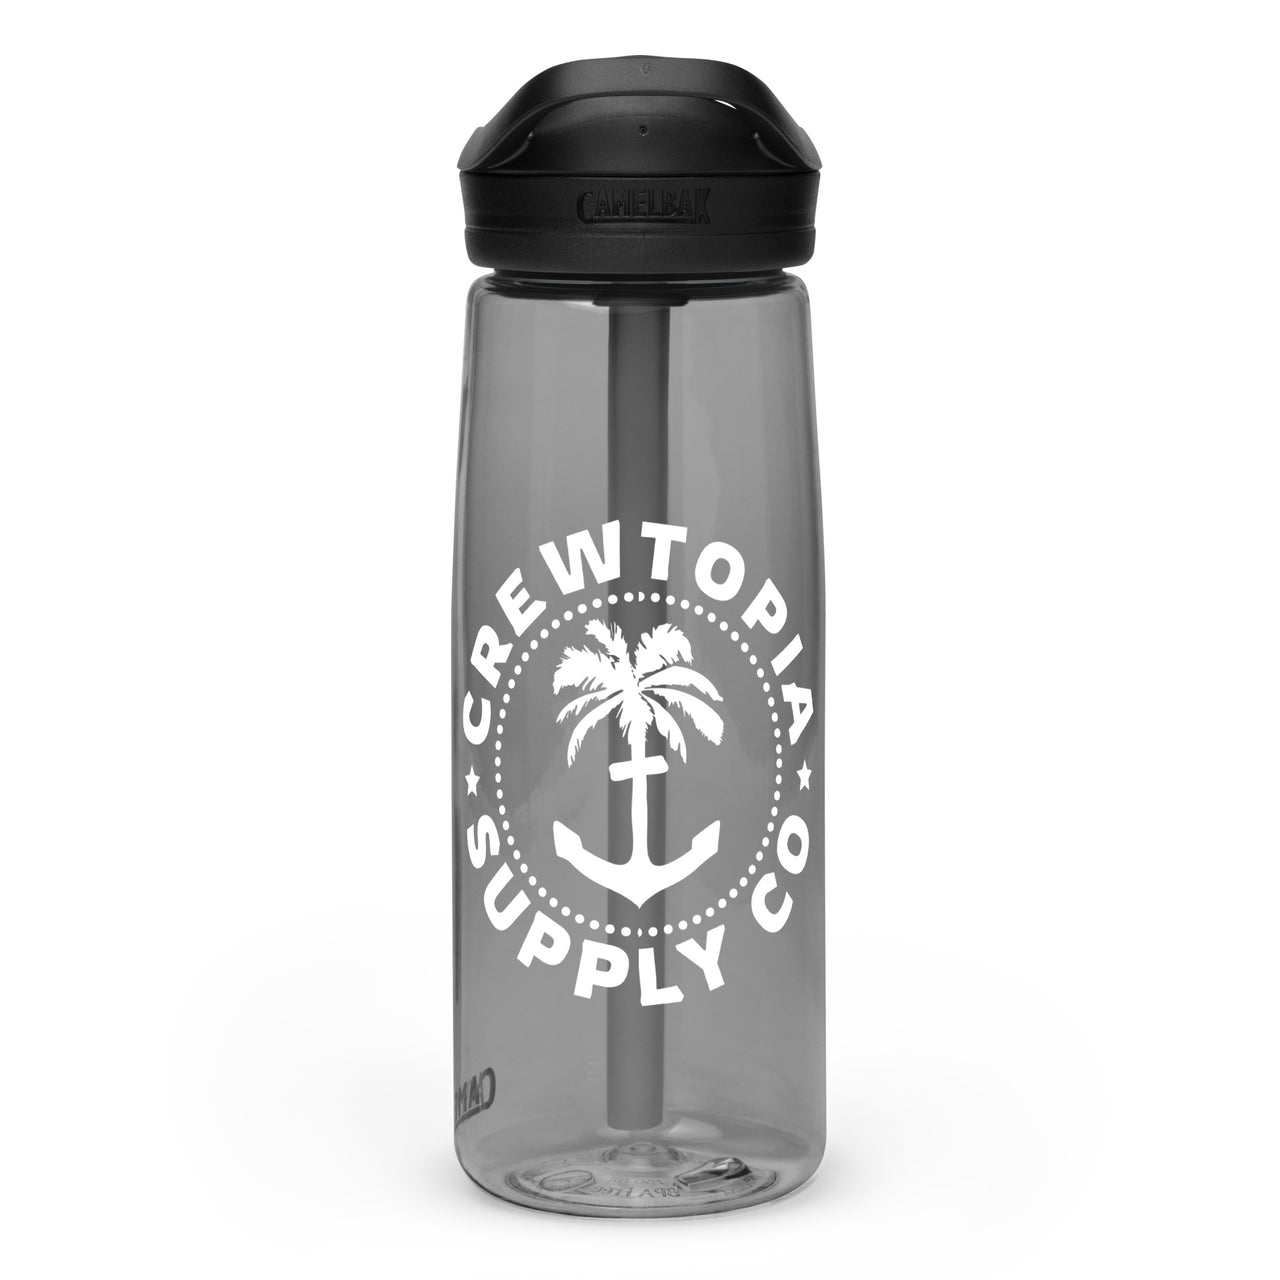 Crewtopia Supply Co. - Sports water bottle